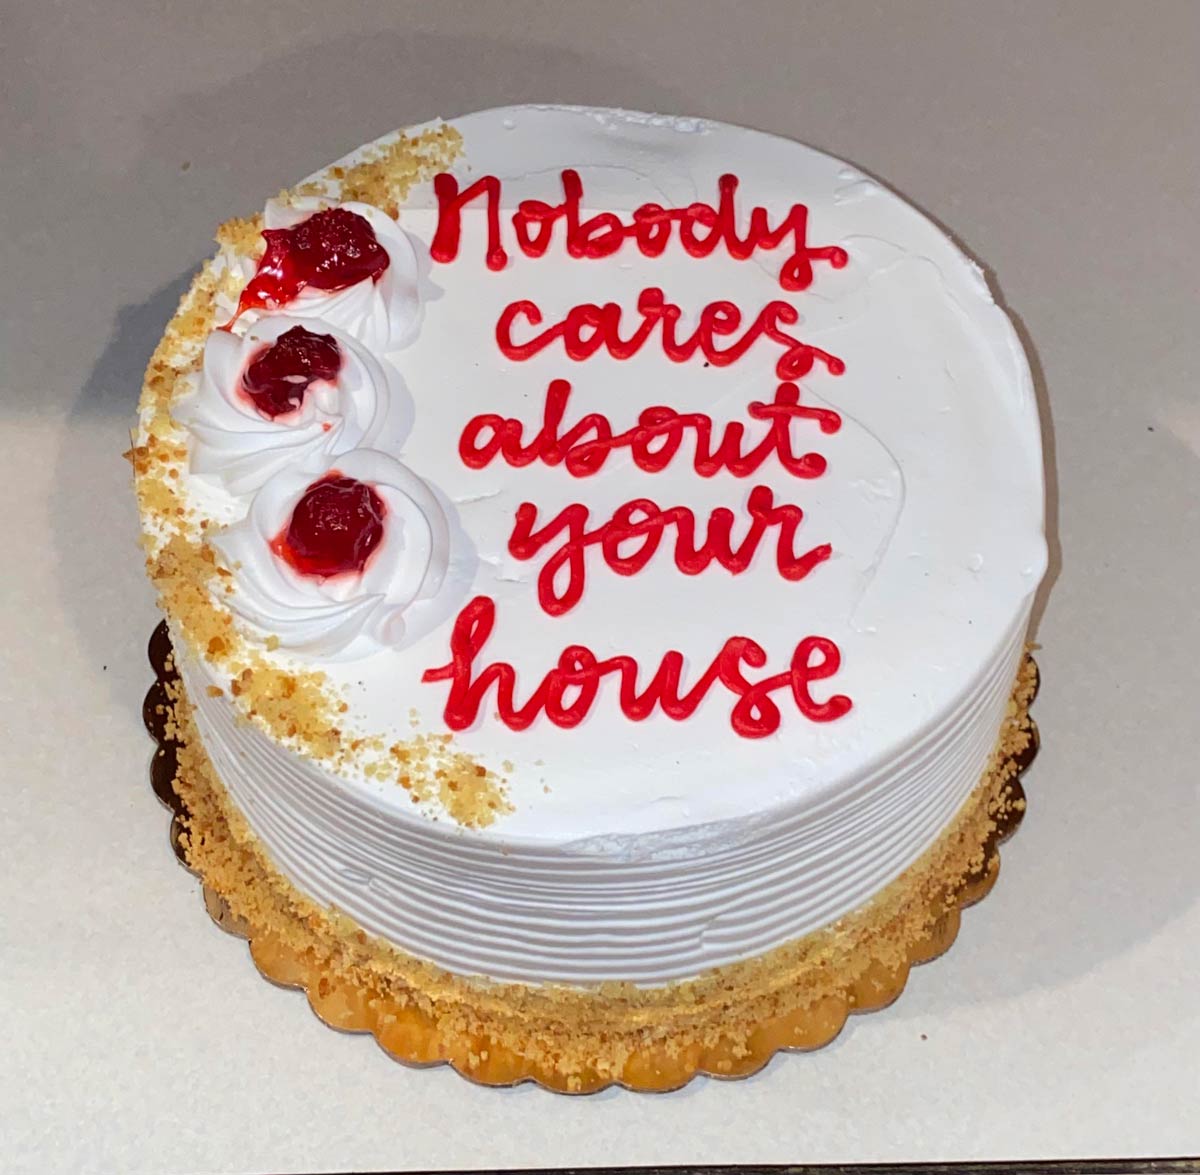 My brother bought his first house this year and won’t shut up about it. Got him this cake for his bday this year.